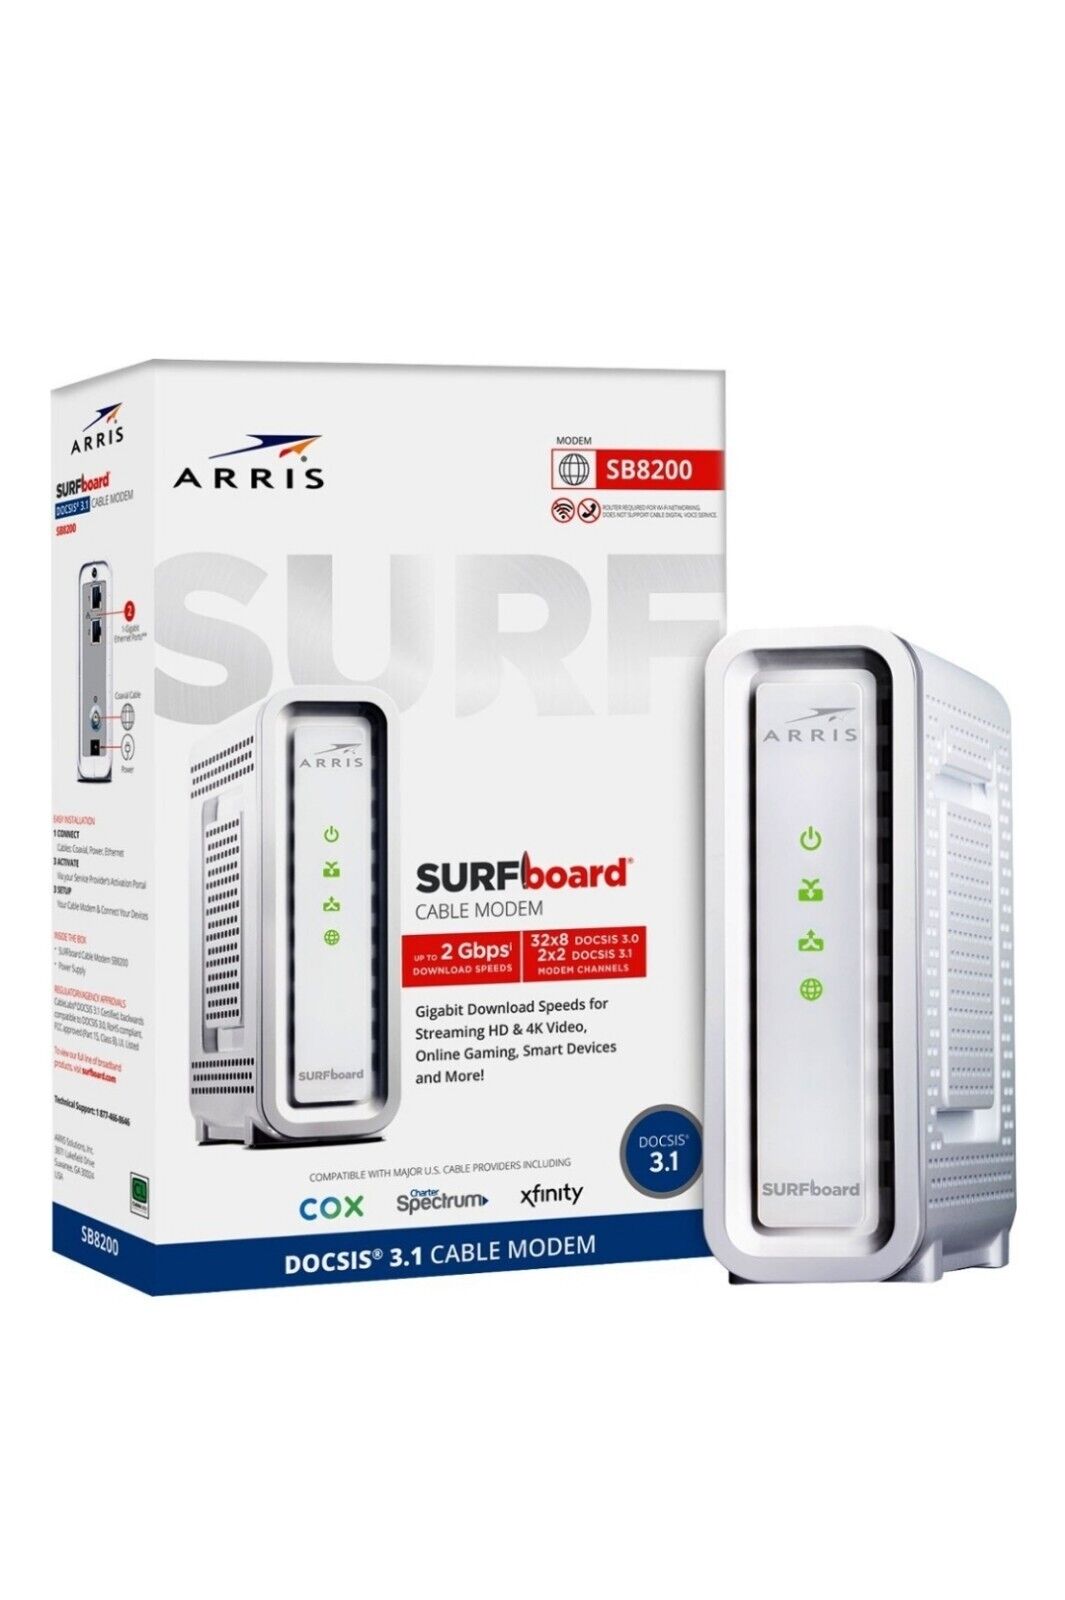 ARRIS SURFboard SB8200 DOCSIS 3.1 10 Gbps Cable Modem Brand 